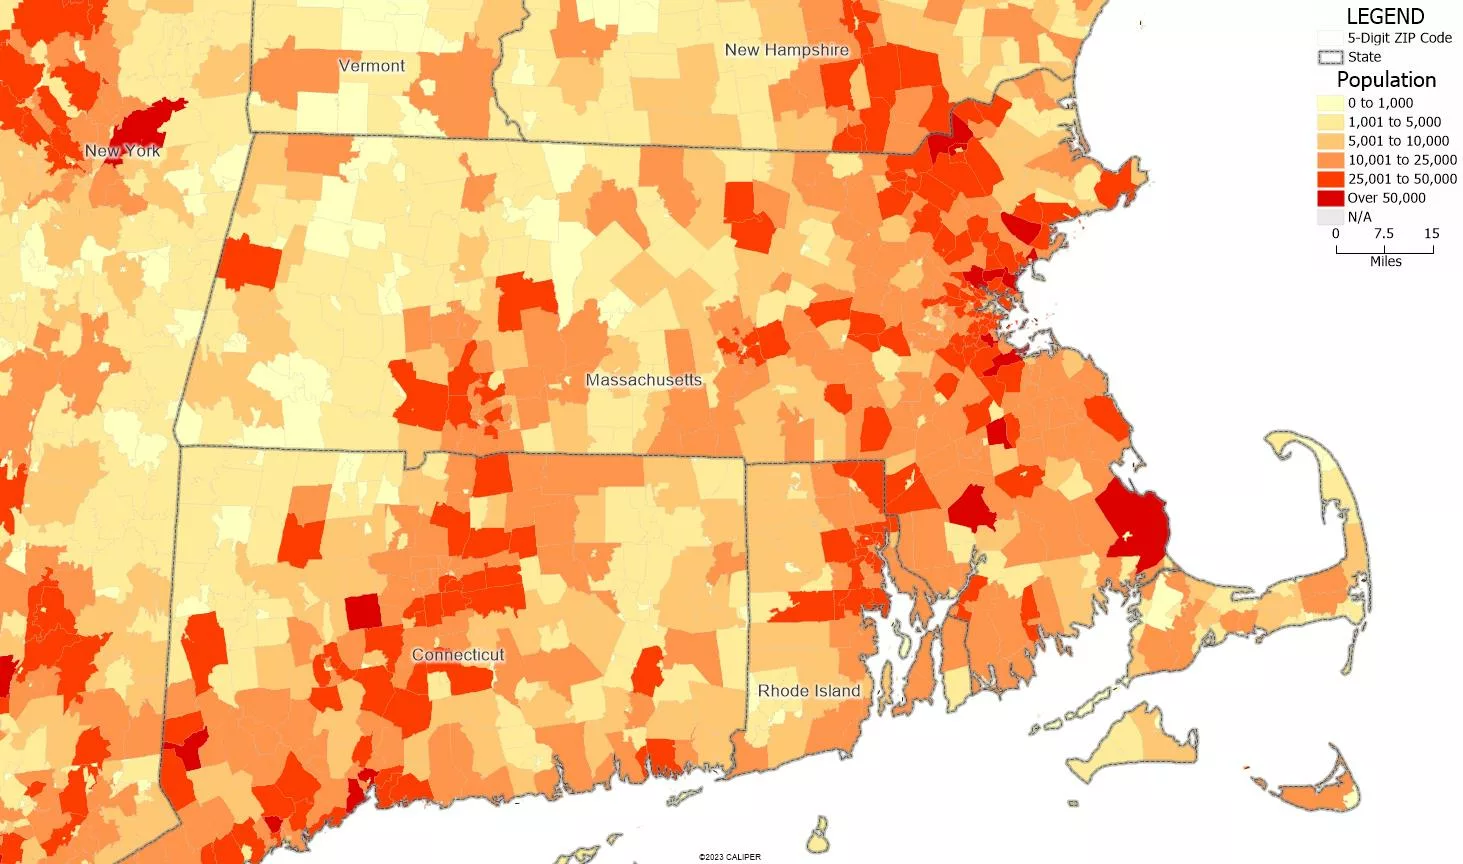 How Do You Map a Franchise Territory? Map of ZIP Code Population.